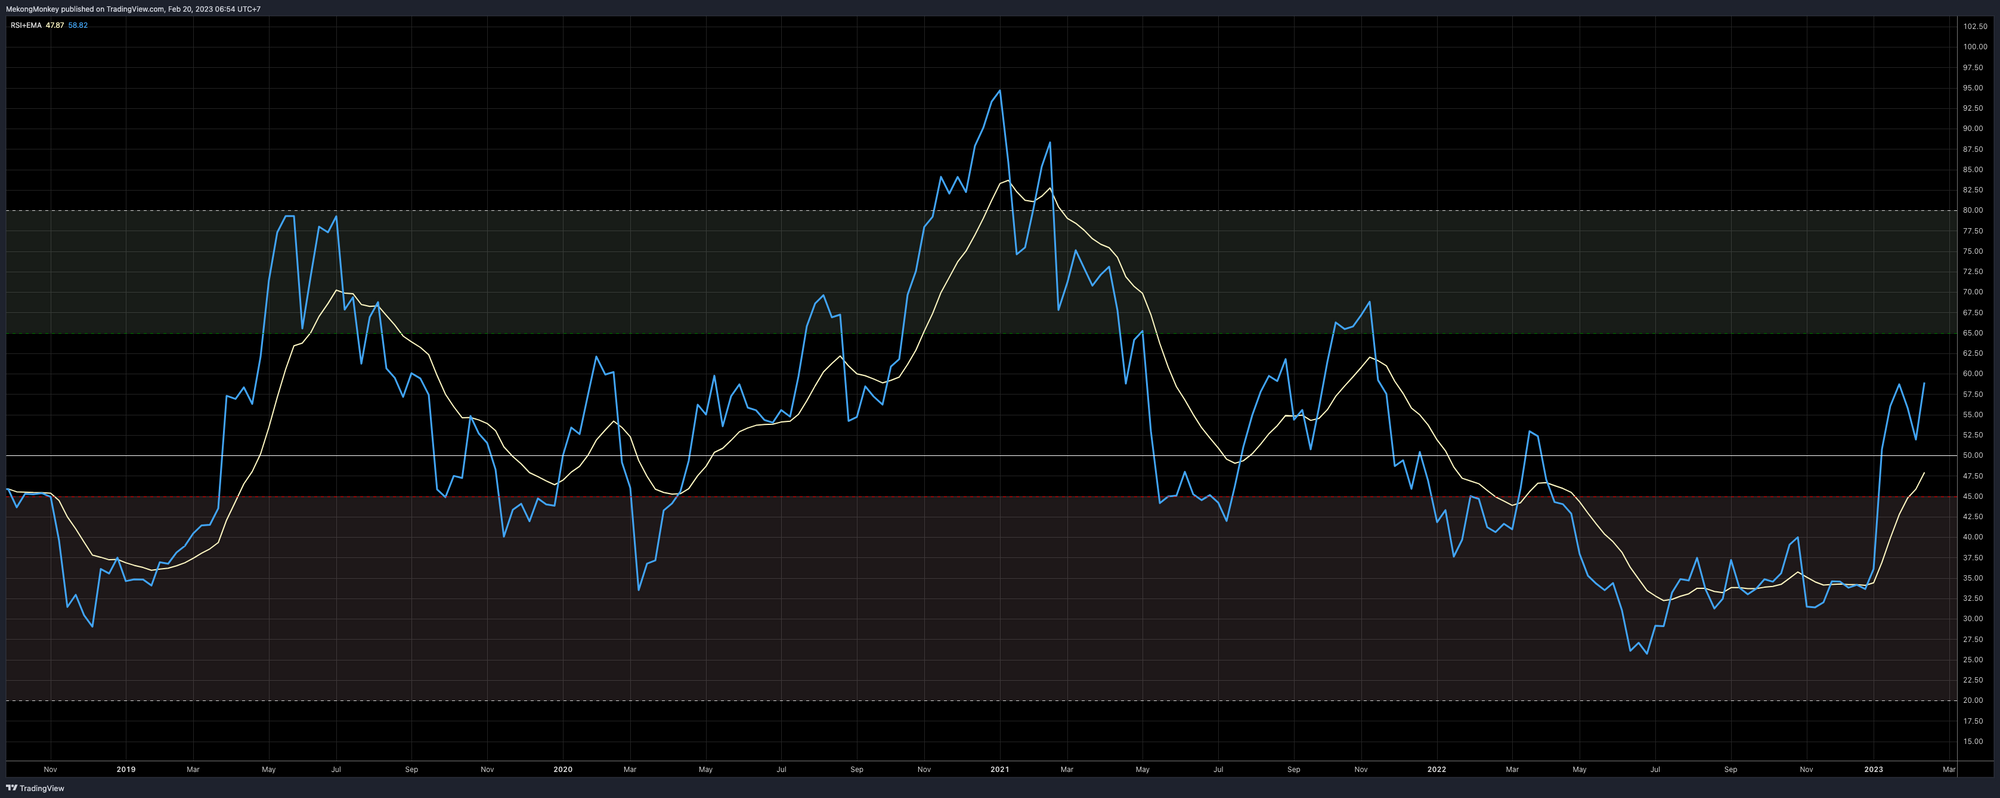 The weekly RSI of BTCUSD